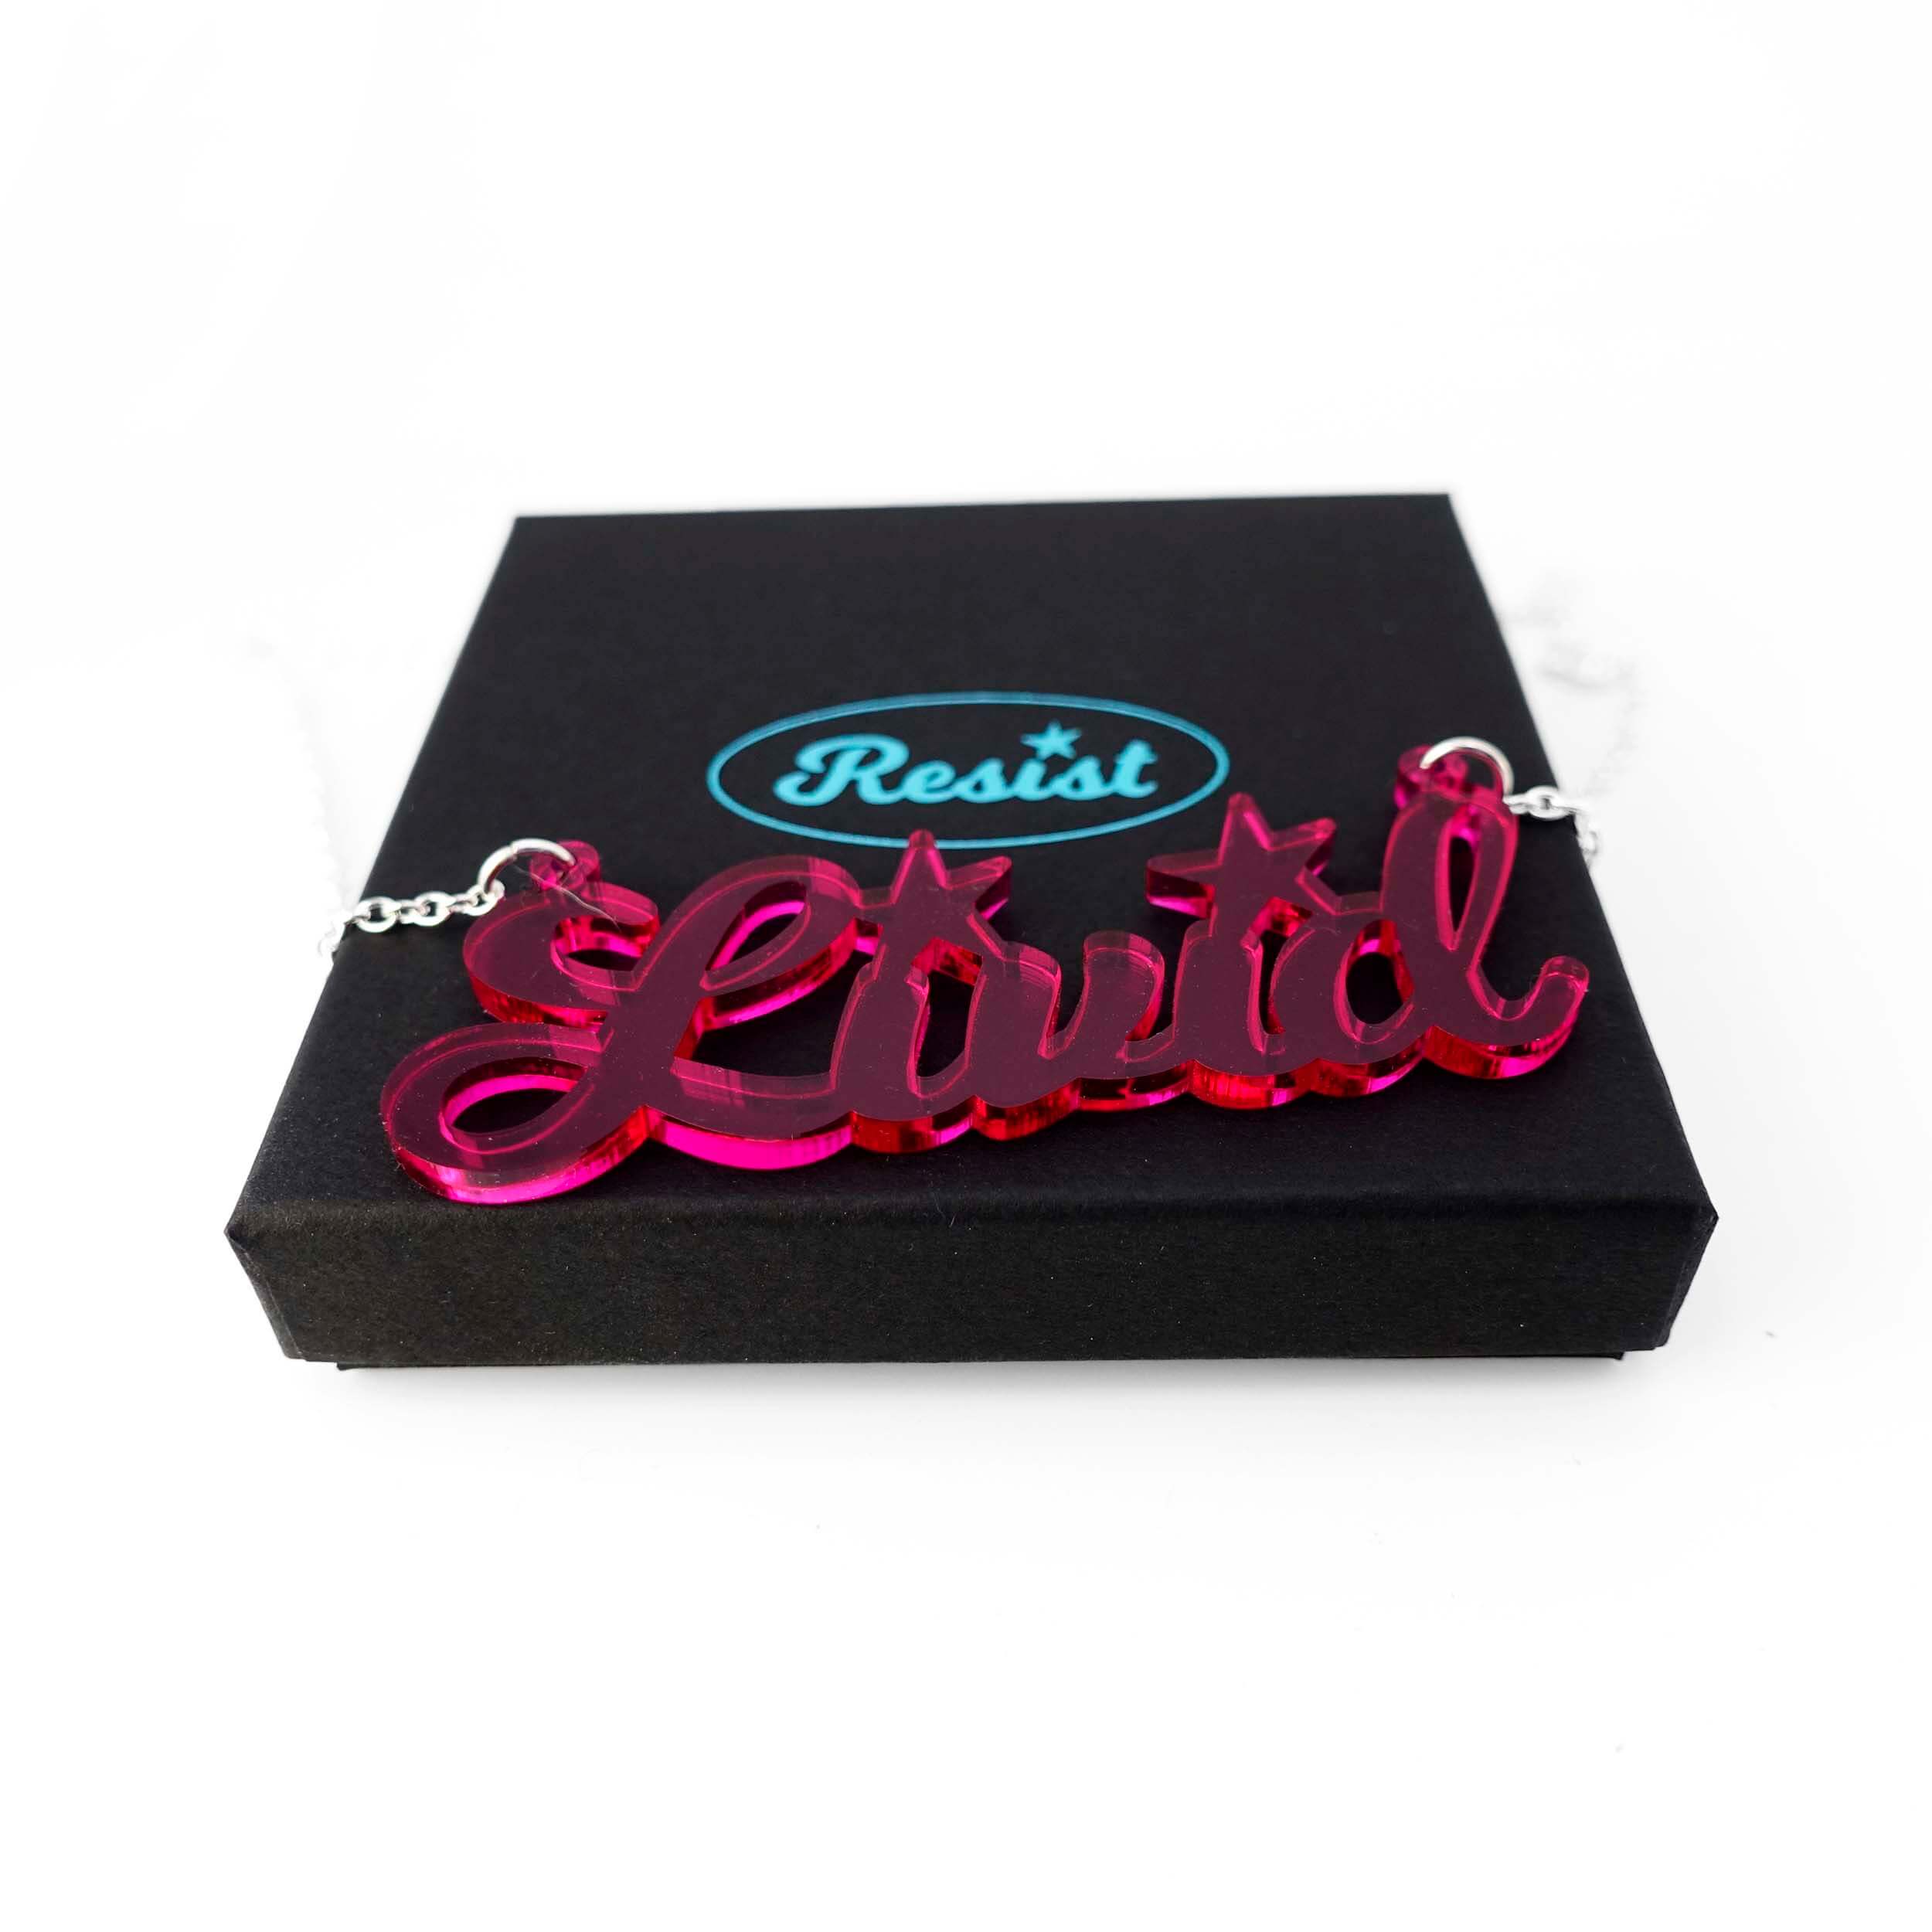 Livid necklace in hot pink shown on a Wear and Resist gift box. 